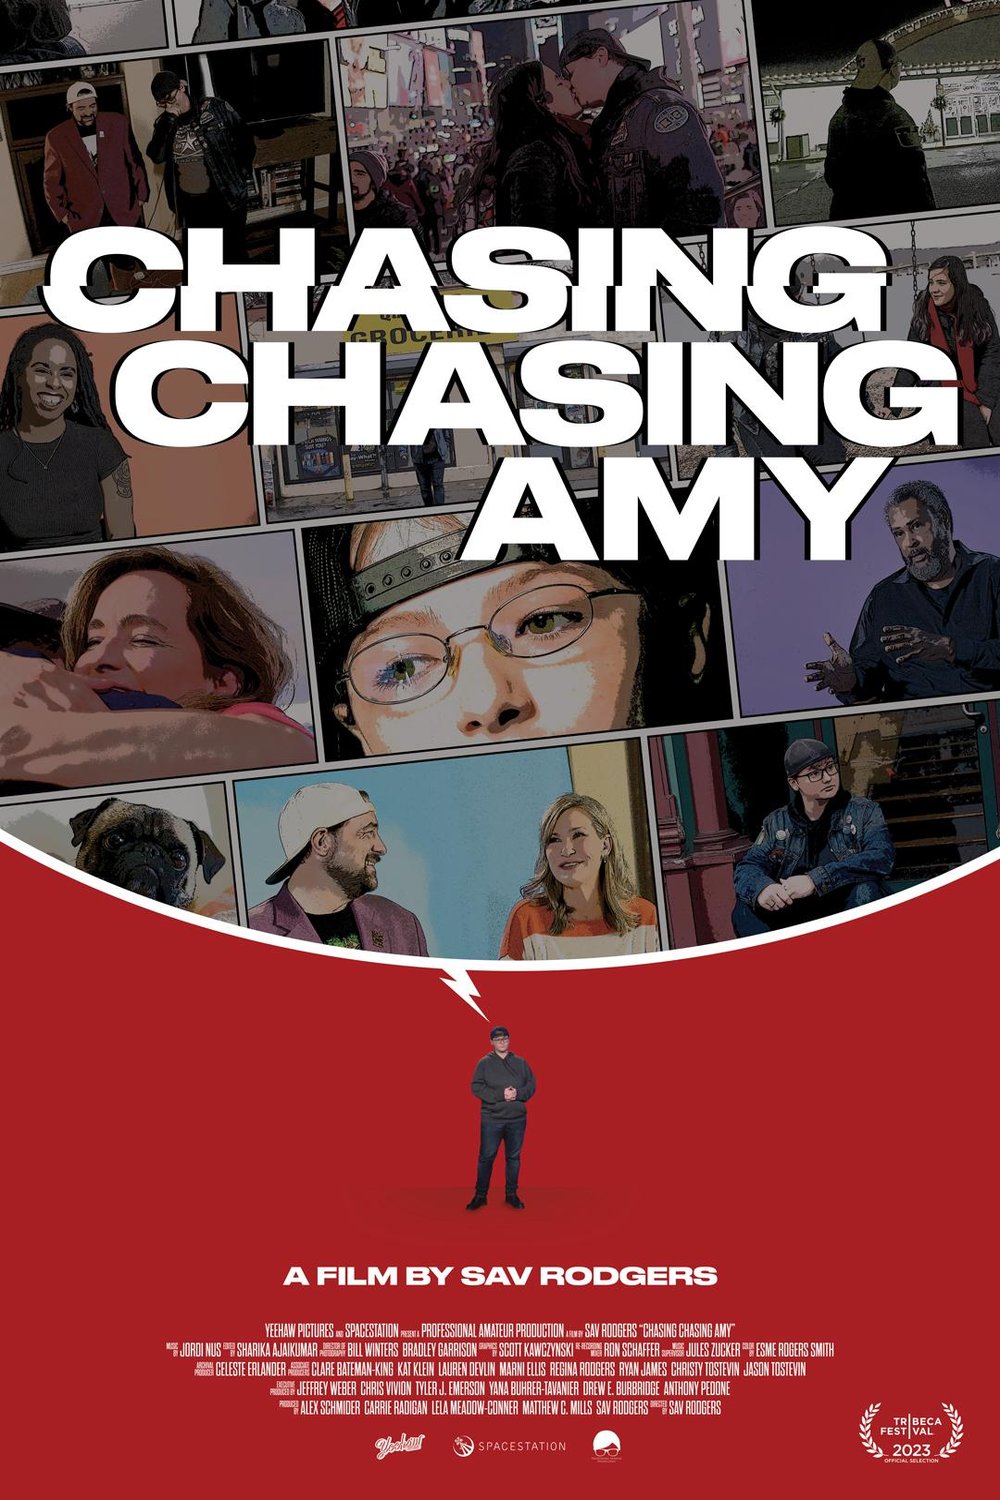 Poster of the movie Chasing Chasing Amy